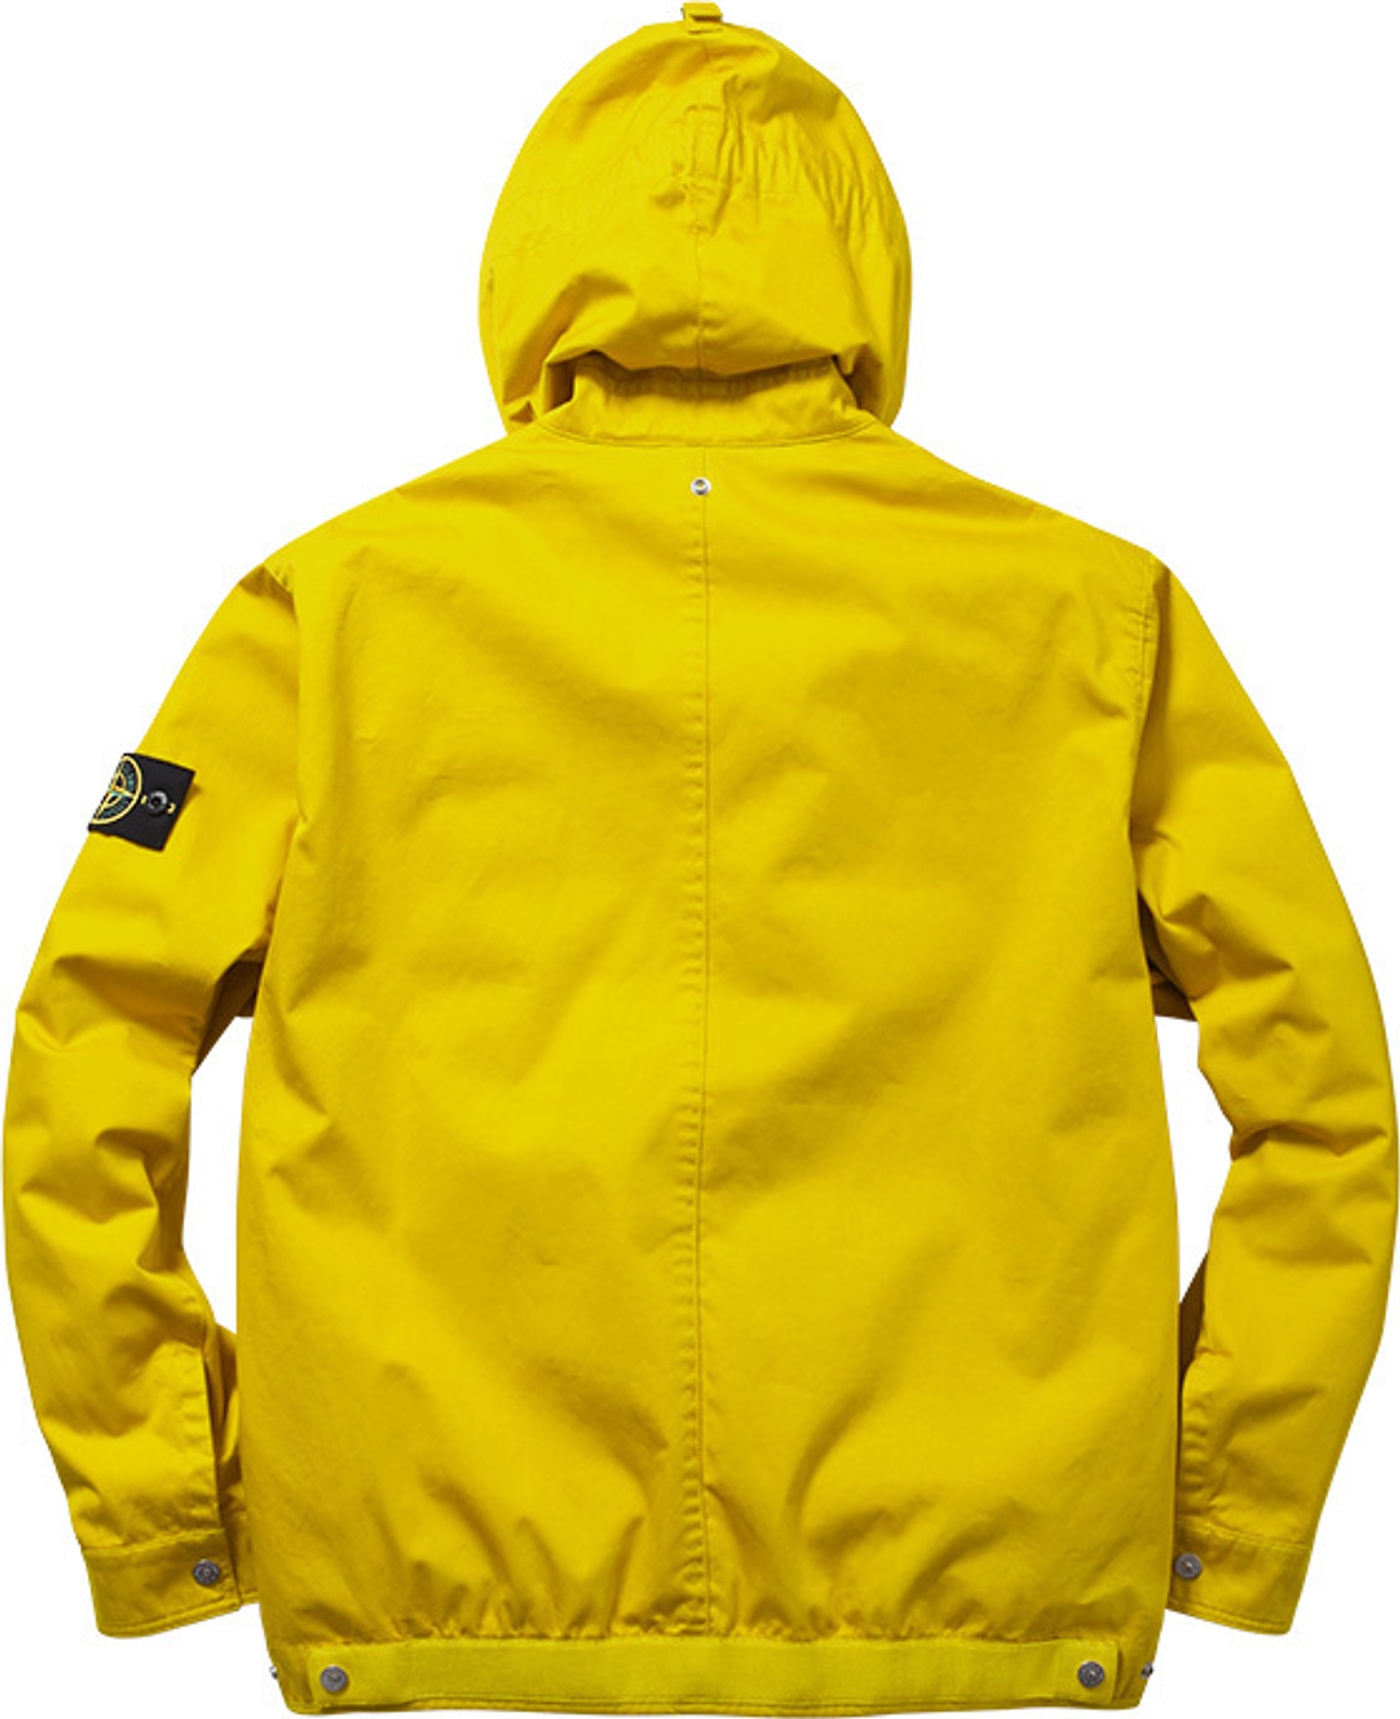 Raso Gommato Cover Nero Jacket 
Wind and water-resistant cotton with removable down liner. Removable eye mask with stow away hood.<br>
Made by Stone Island<br> (9/36)